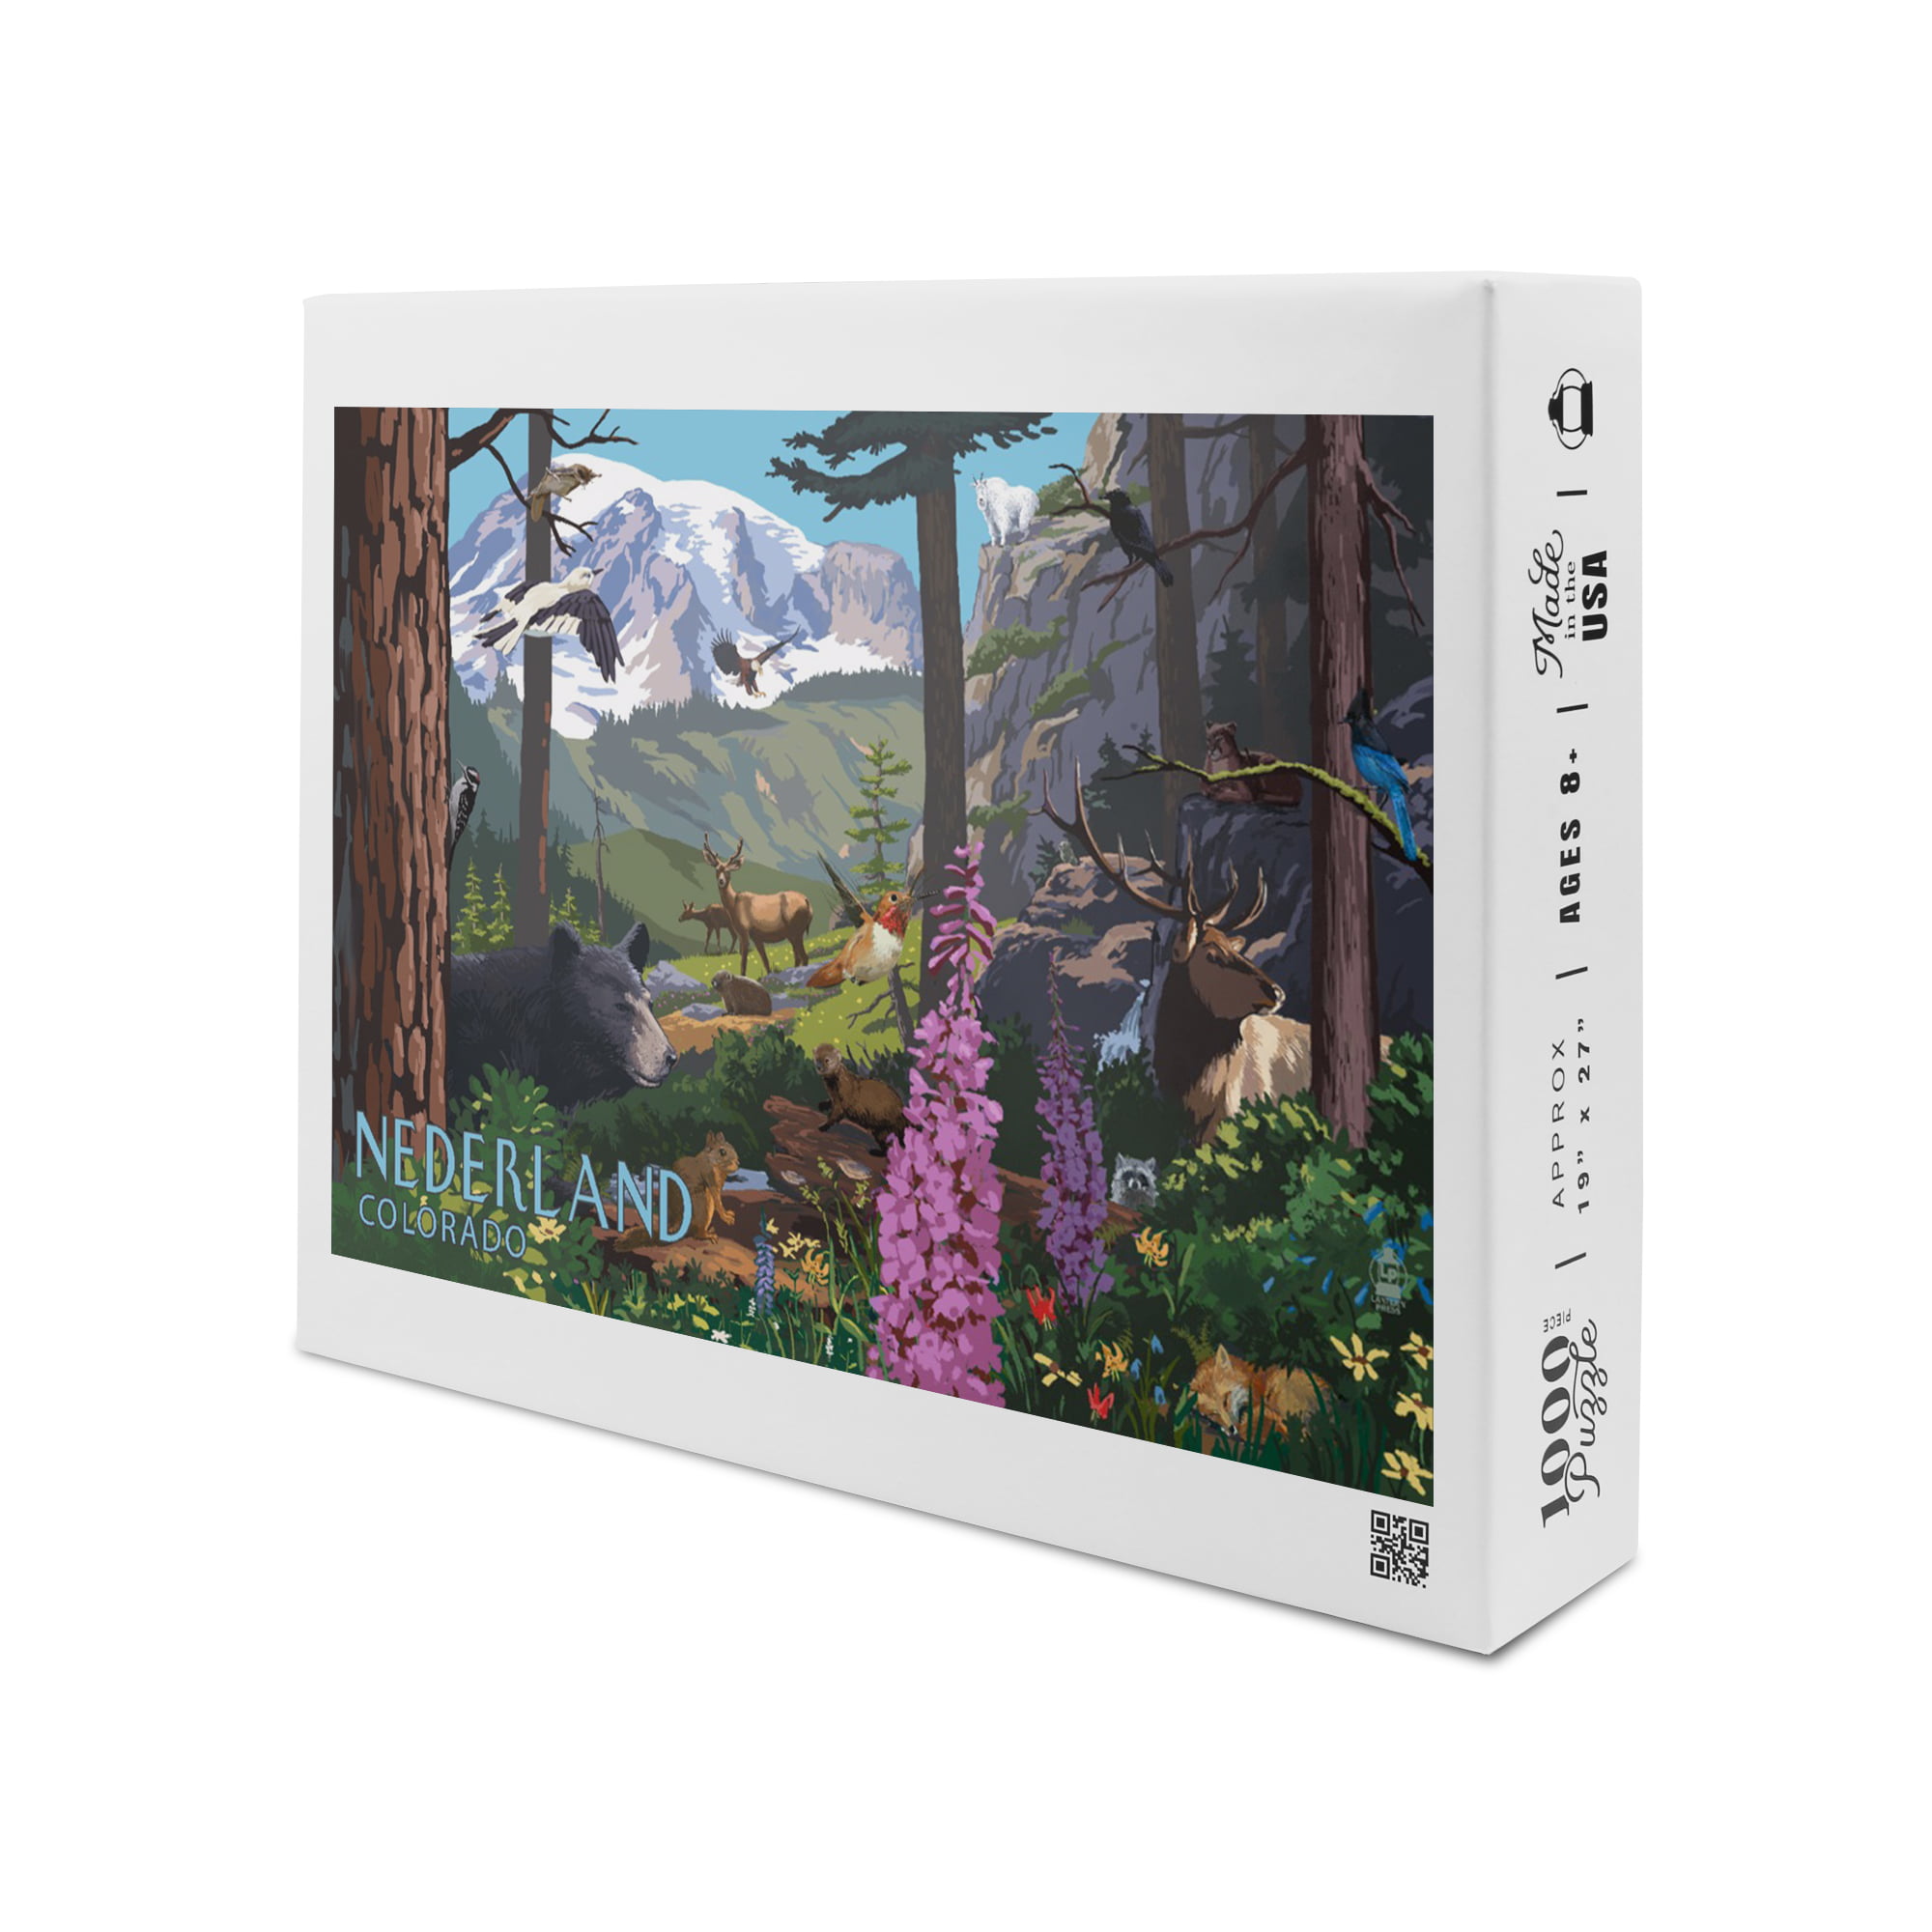 Nederland, Colorado, Wildlife (1000 Piece Puzzle, 19x27, Challenging Jigsaw Puzzle for Adults and Family, Made in USA) - Walmart.com